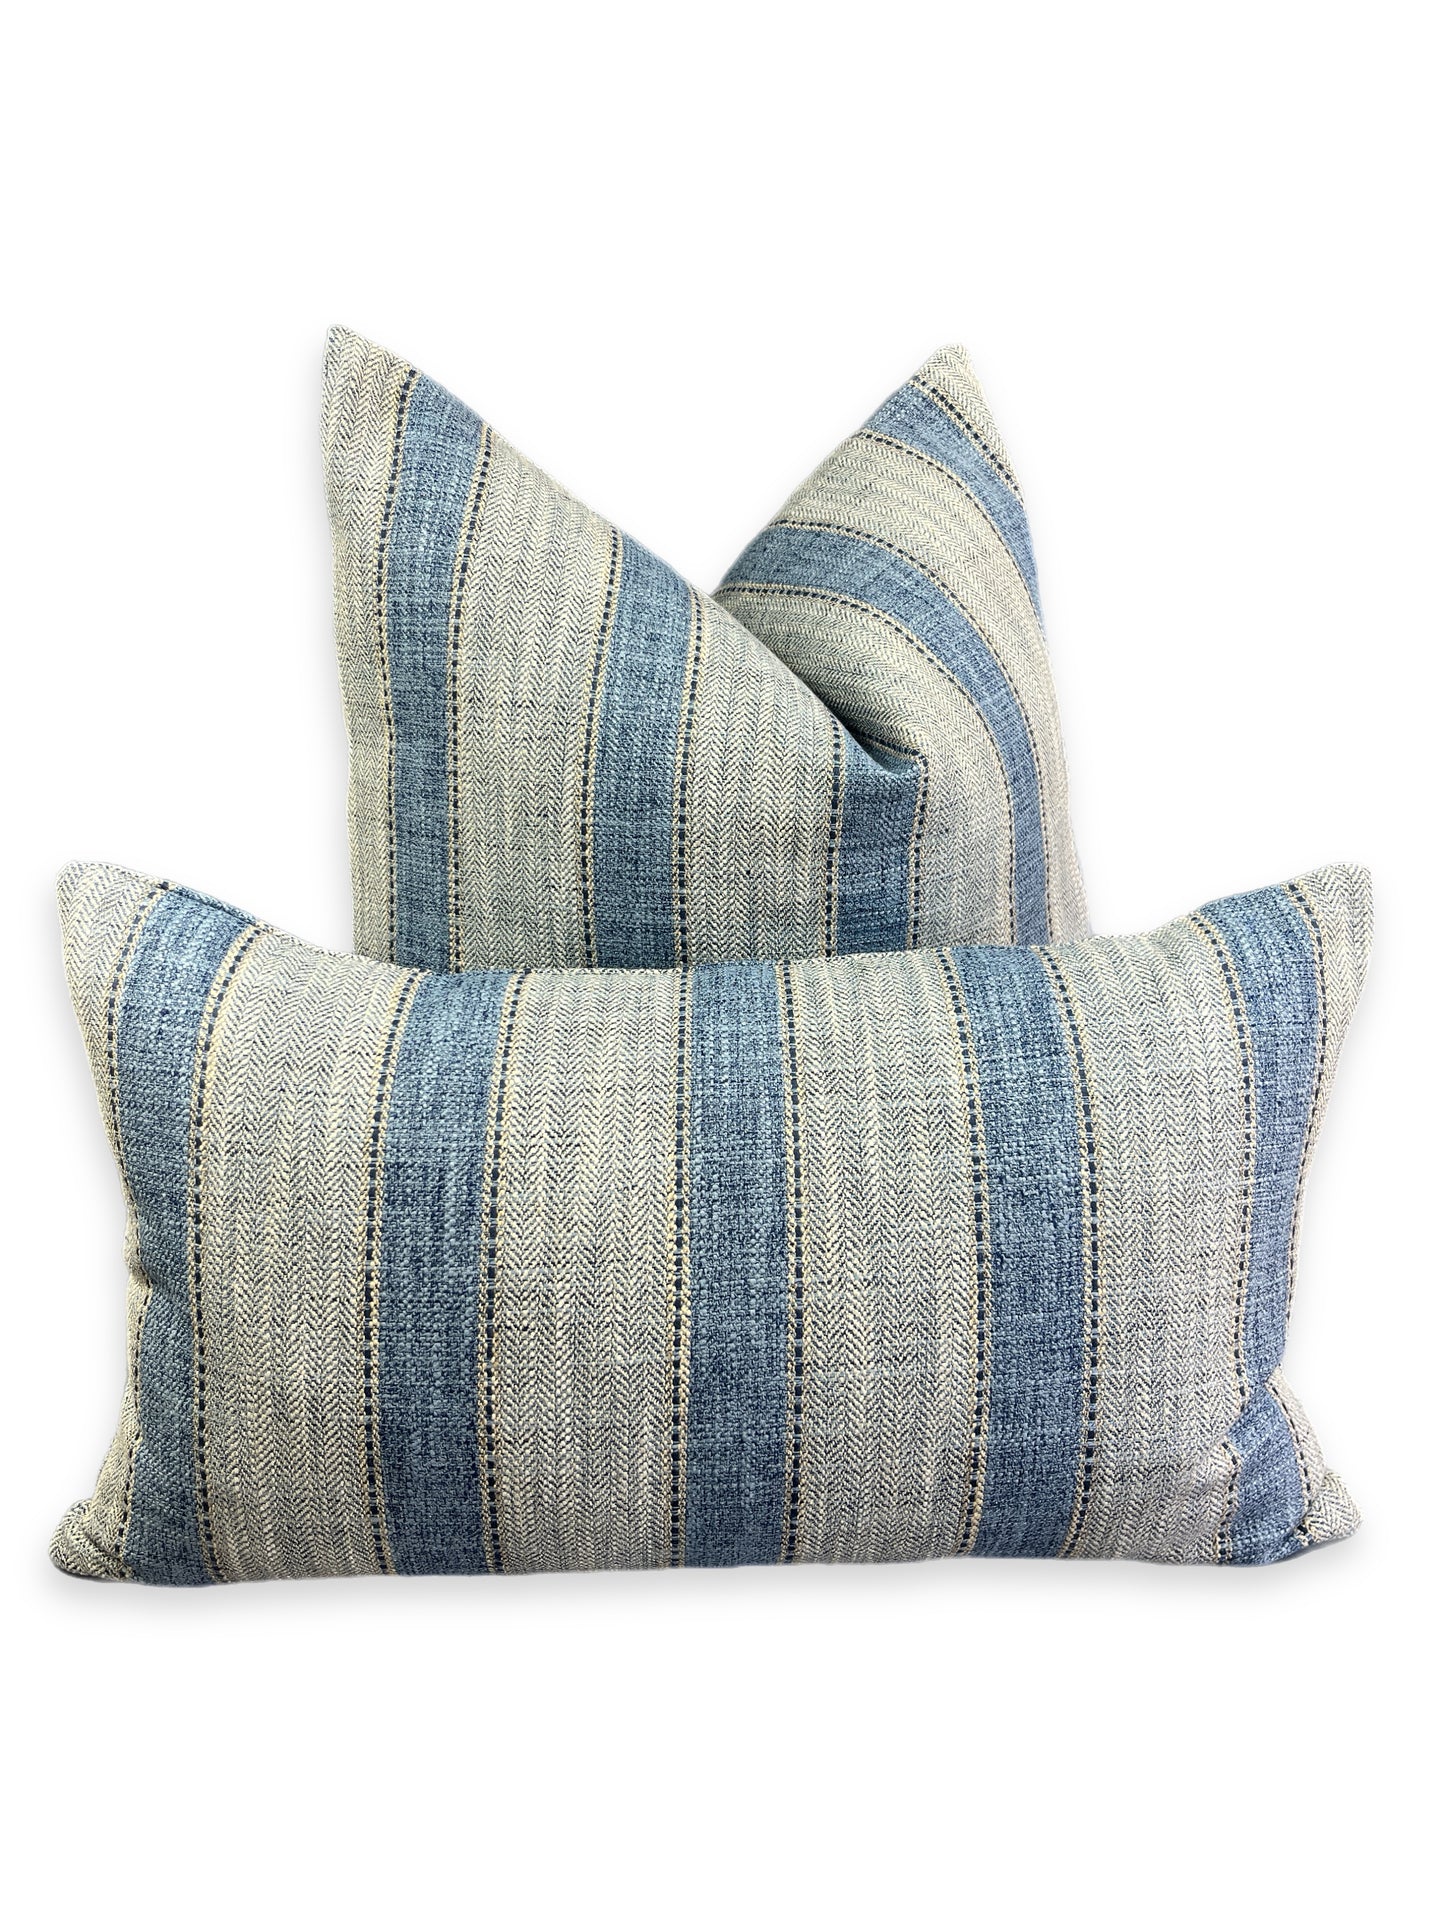 Luxury Pillow -  24" x 24" -  Natural Weave-Denim; Complimentary denim colored linen woven into solid stripes